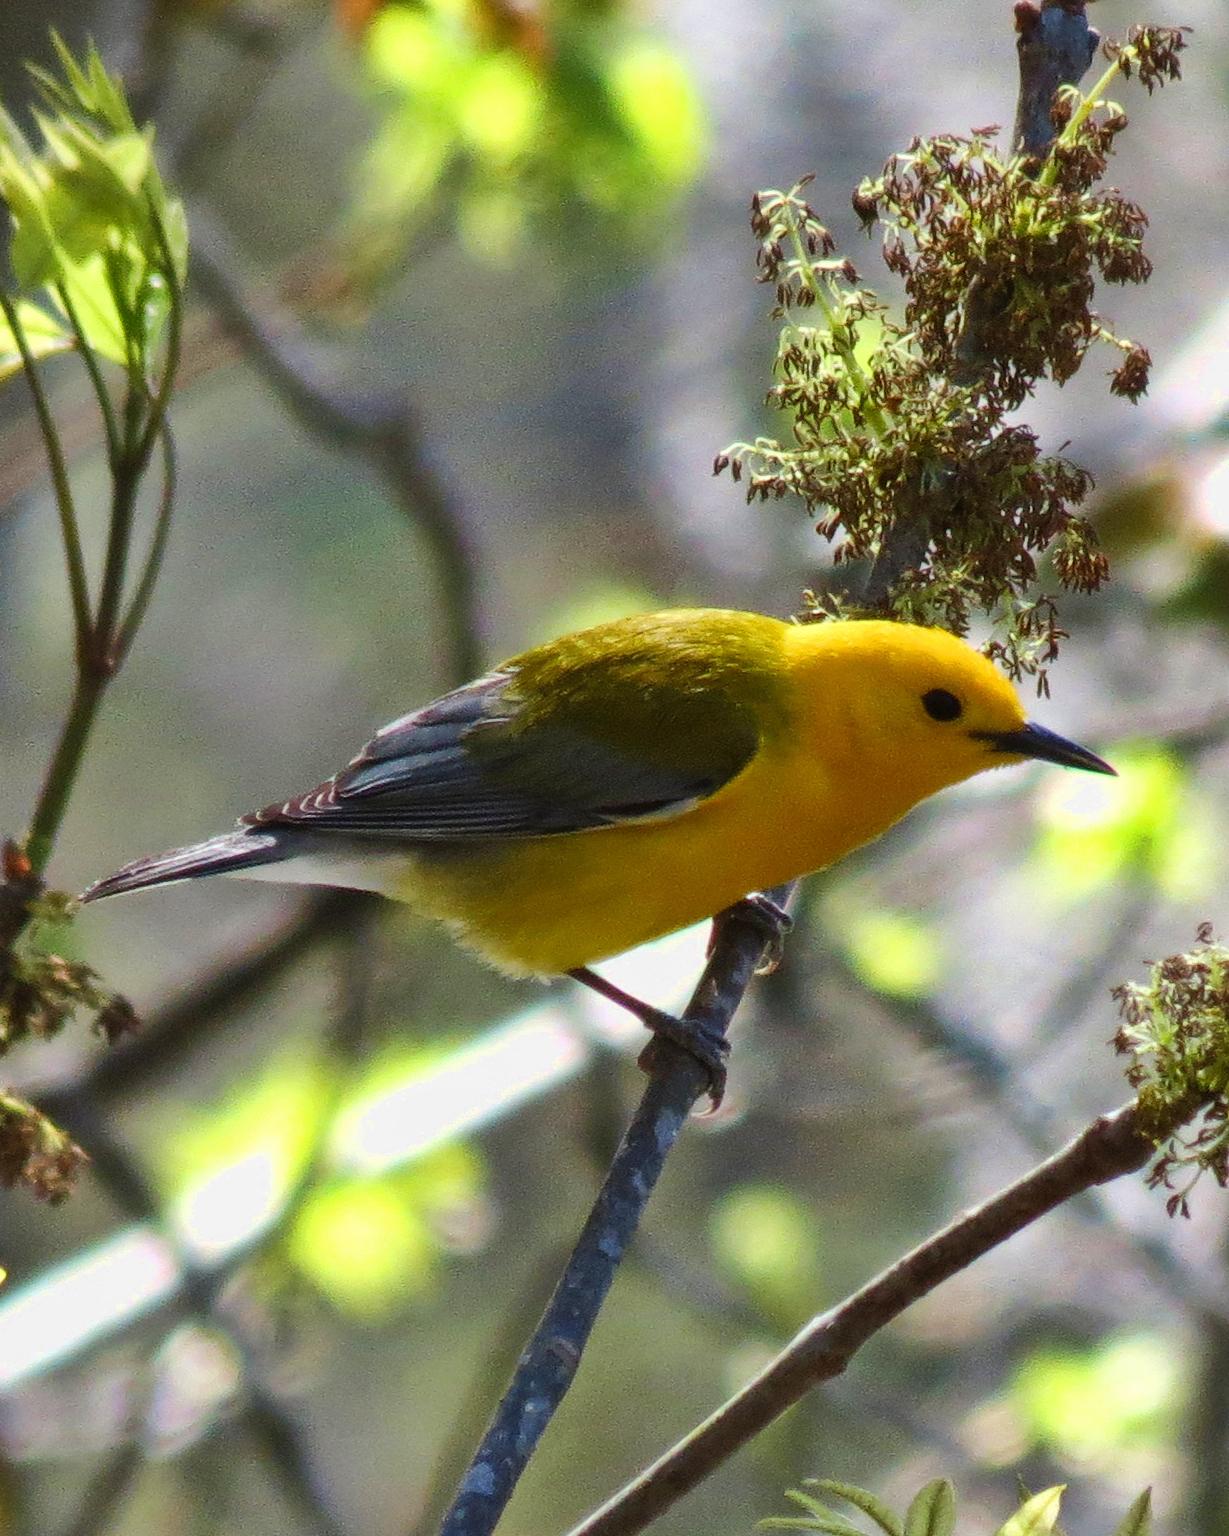 Prothonotary Warbler Photo by Sherrie Ingram